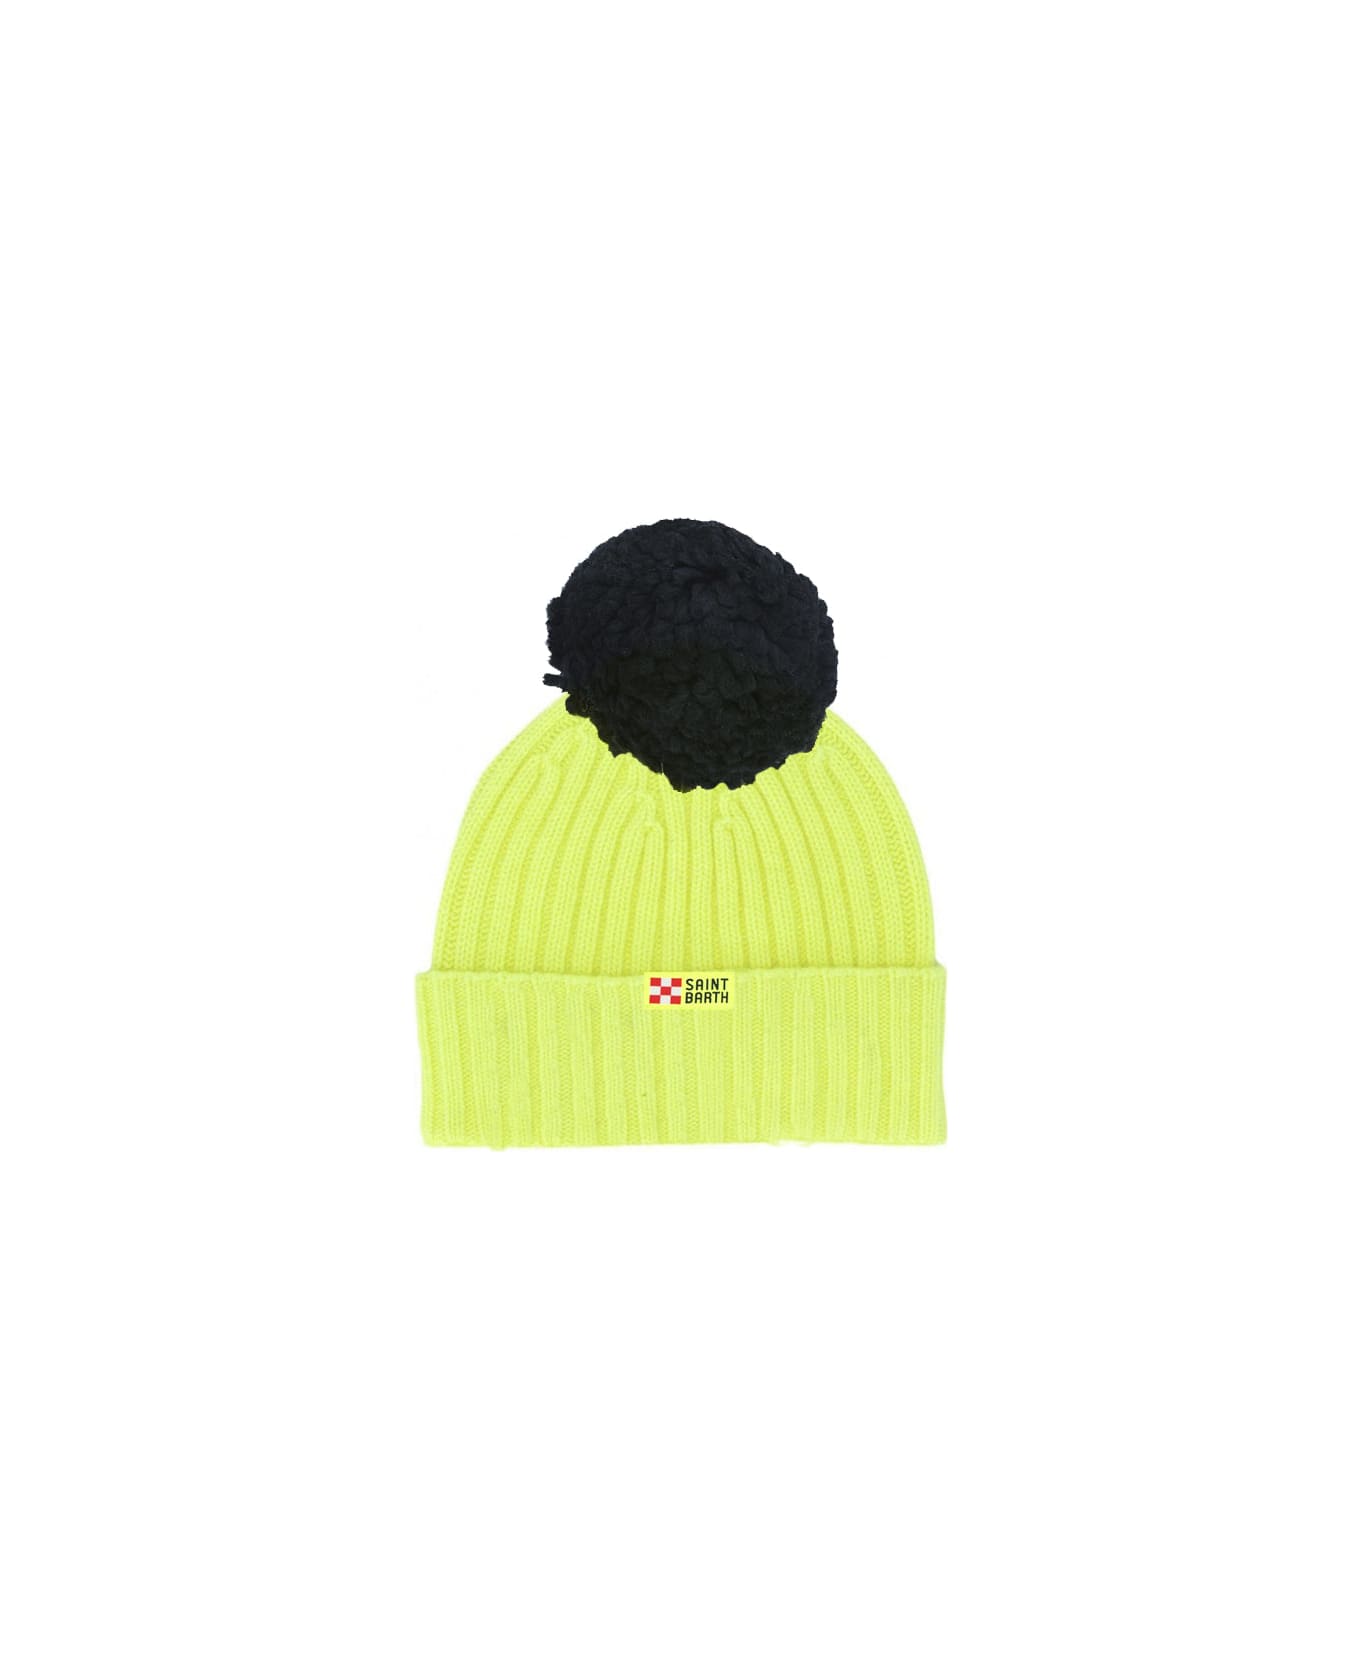 MC2 Saint Barth Kid Cashmere Blended Yellow Fluo Hat Off Piste Embroidery - YELLOW